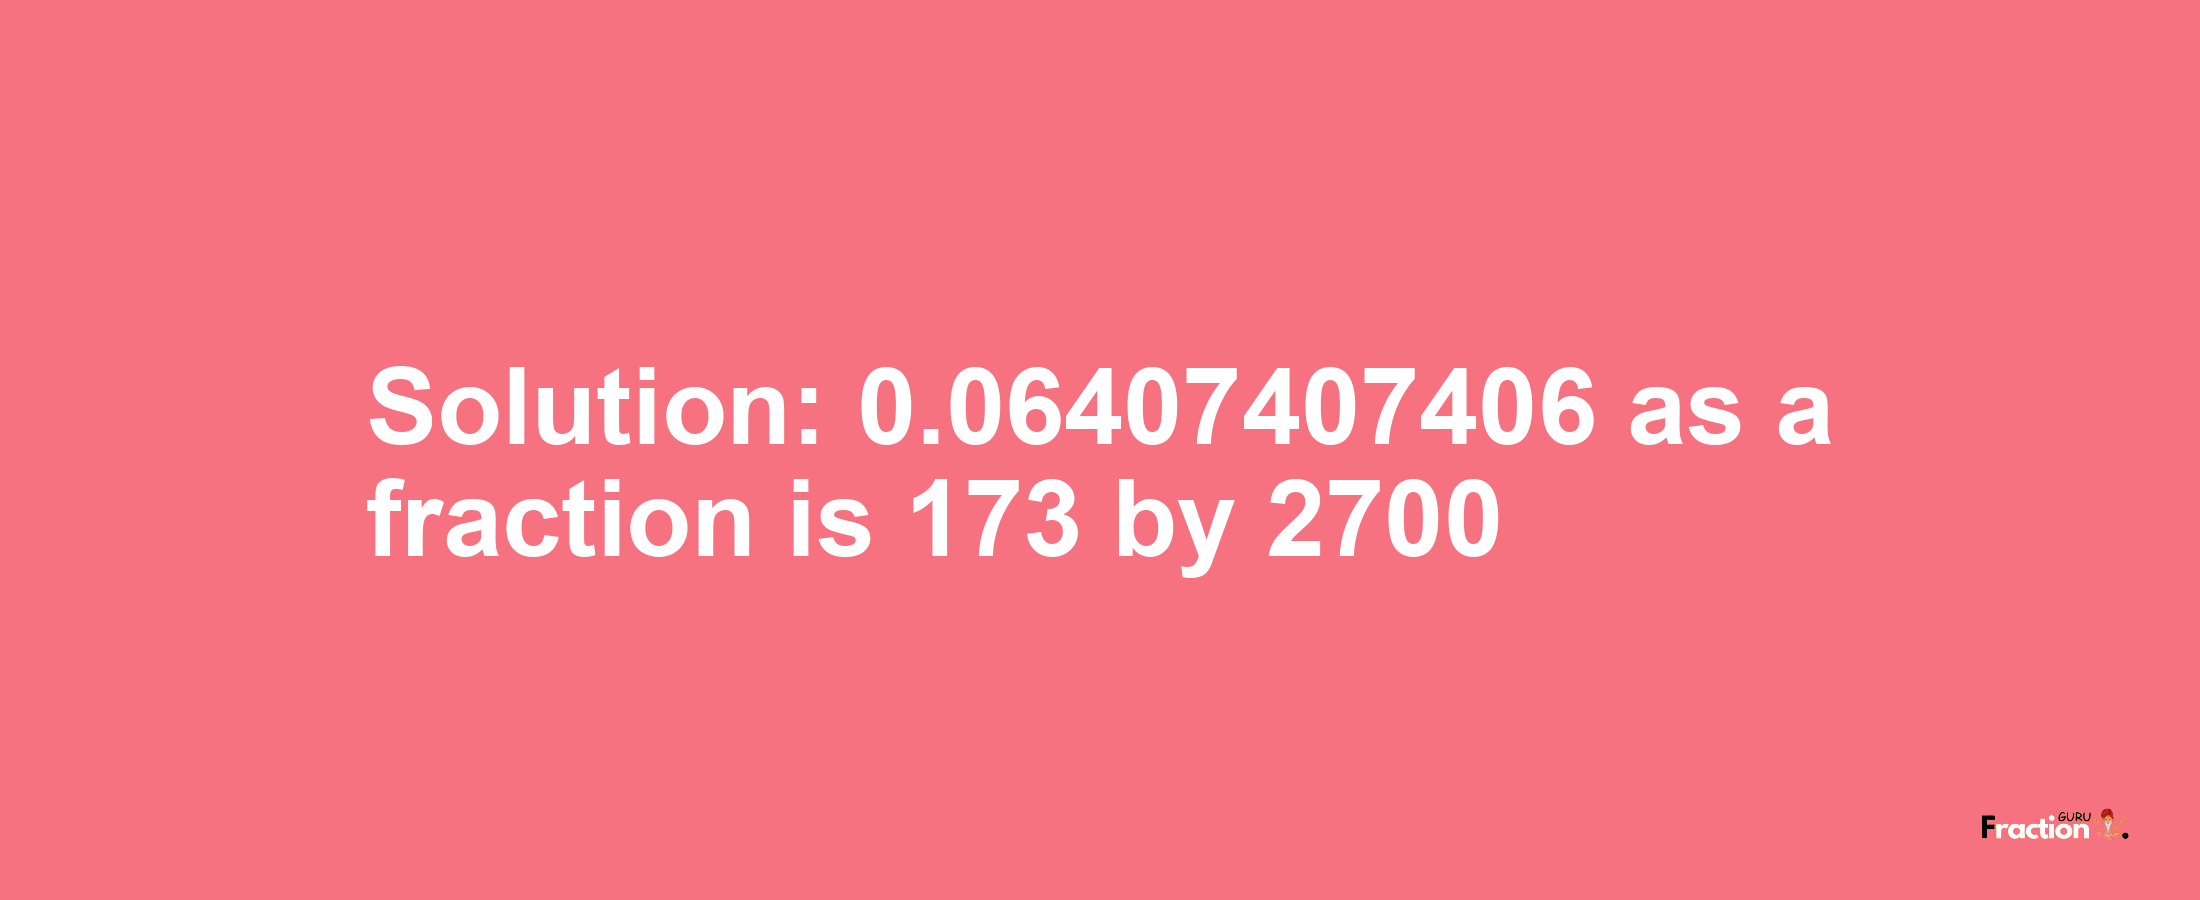 Solution:0.06407407406 as a fraction is 173/2700